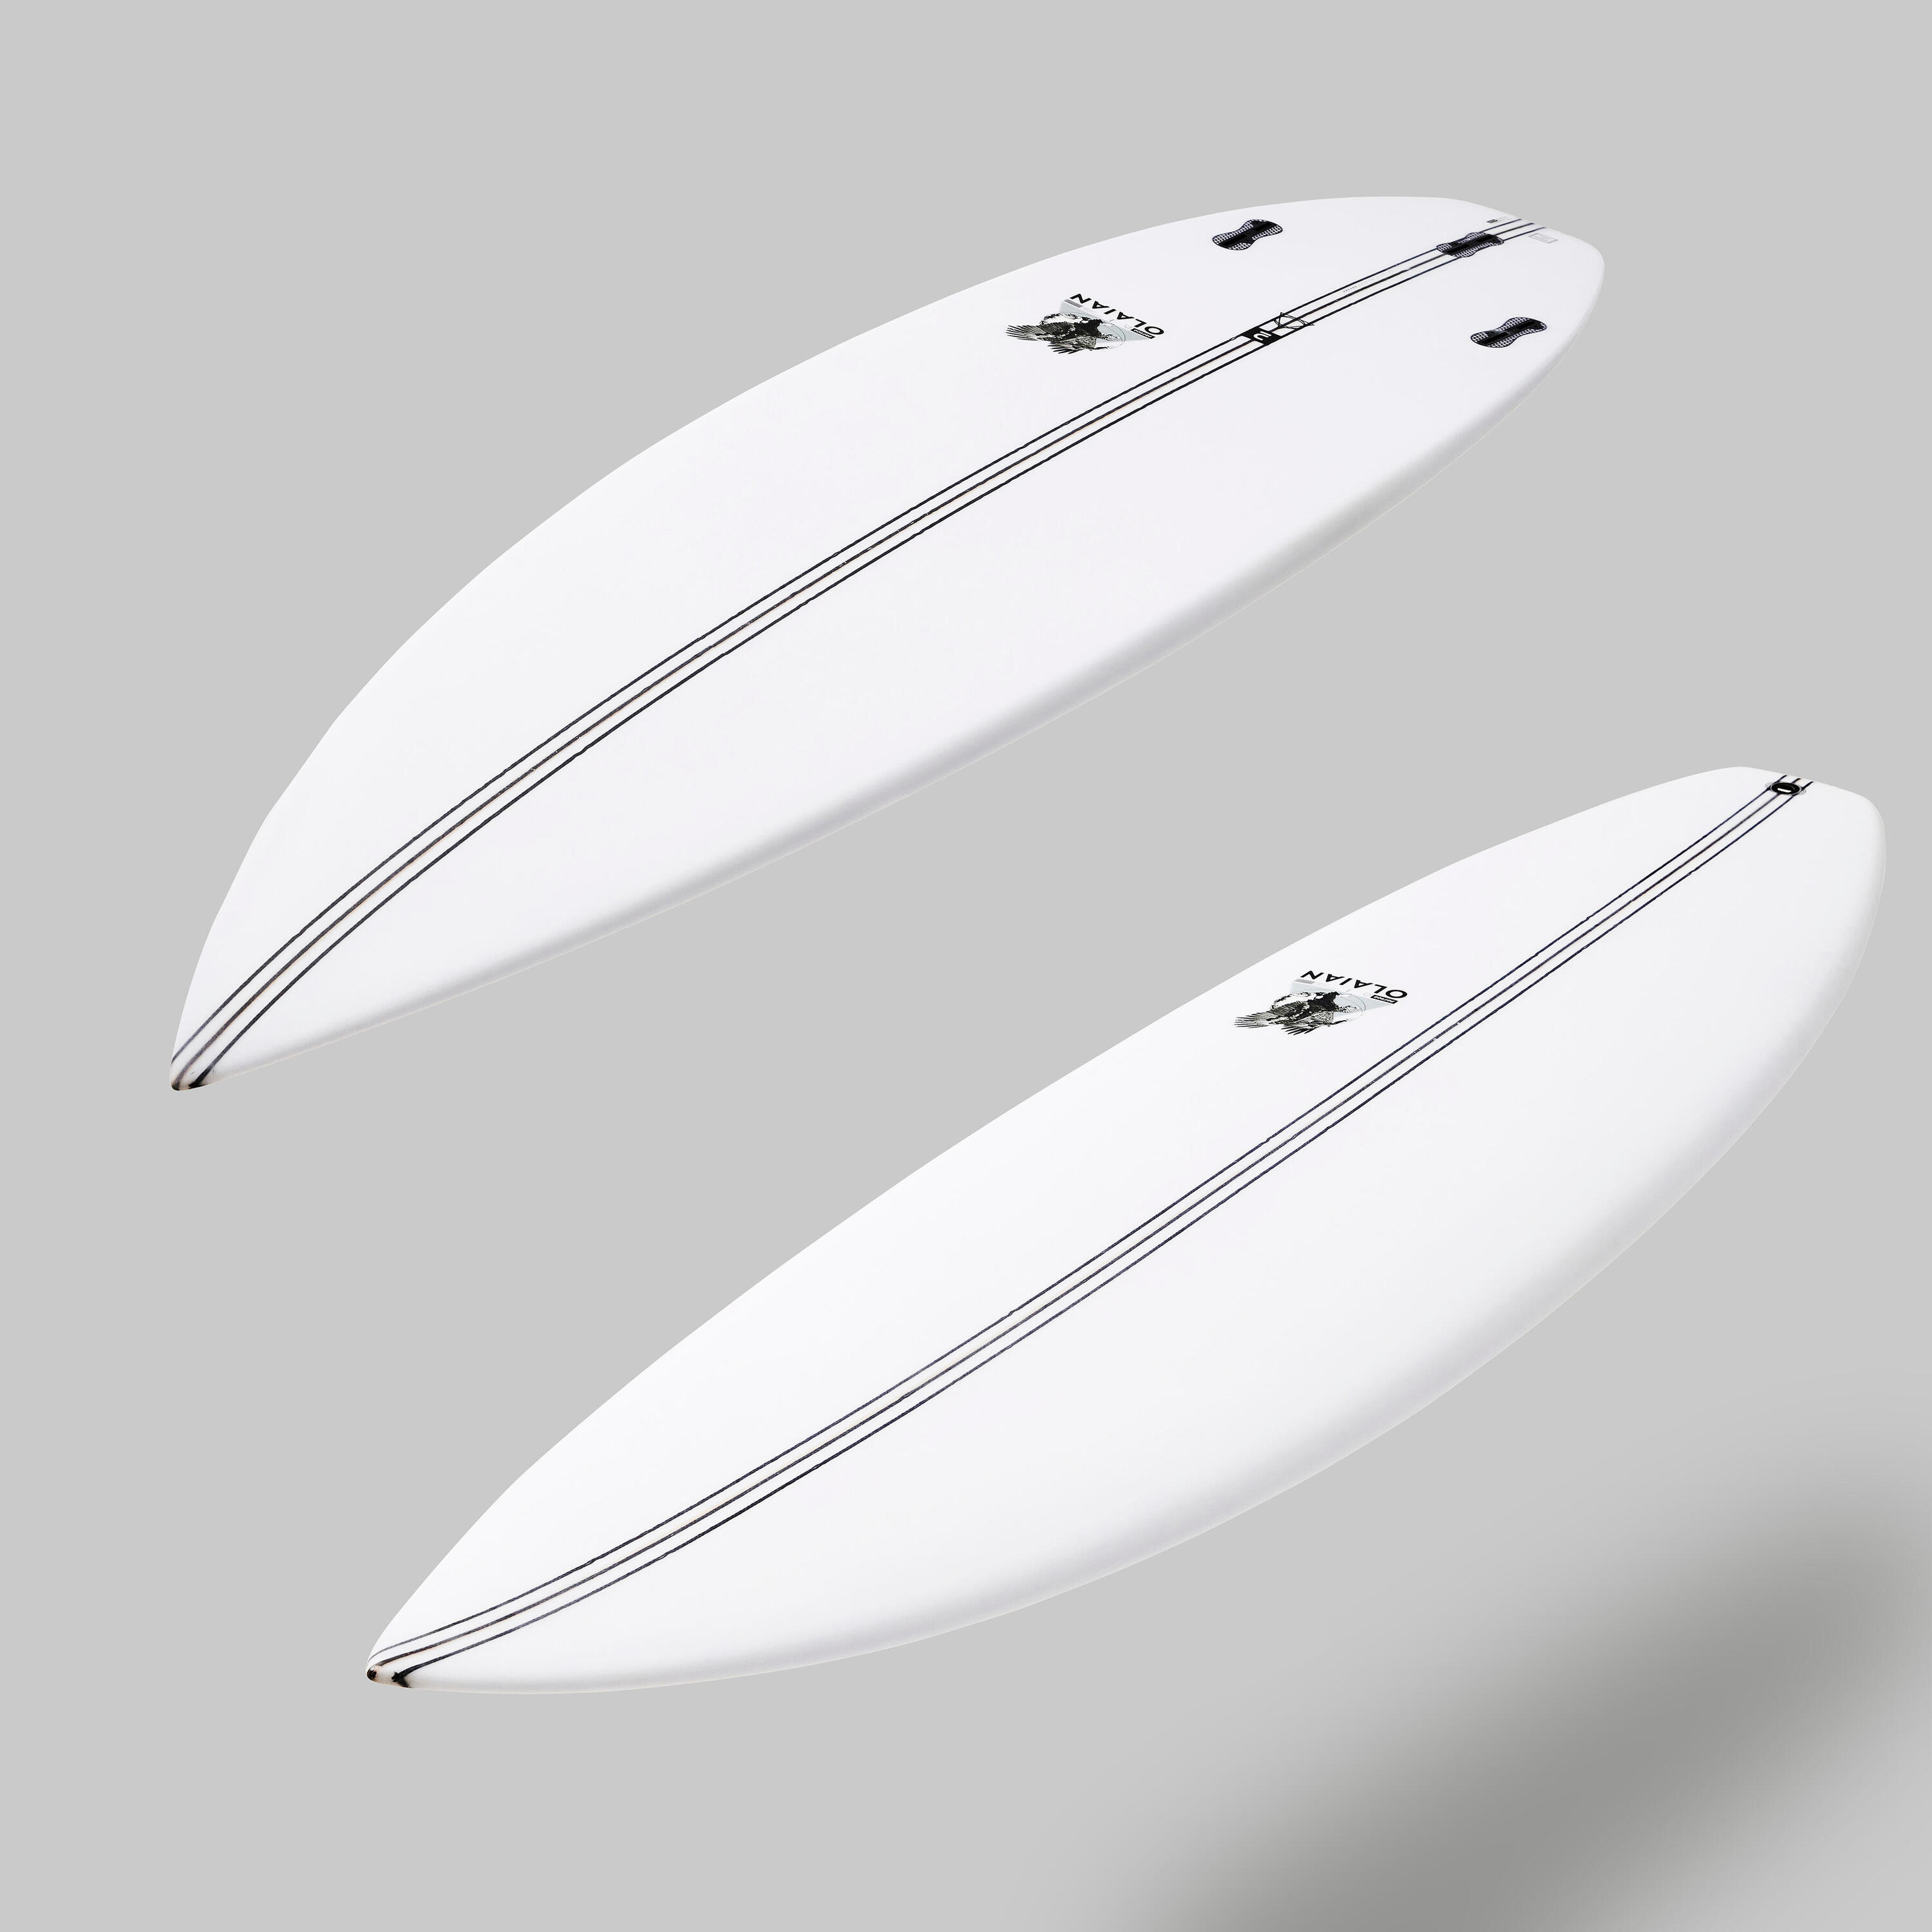 SHORTBOARD 900 PERF 5'11 27 L - Supplied without fins 5/9